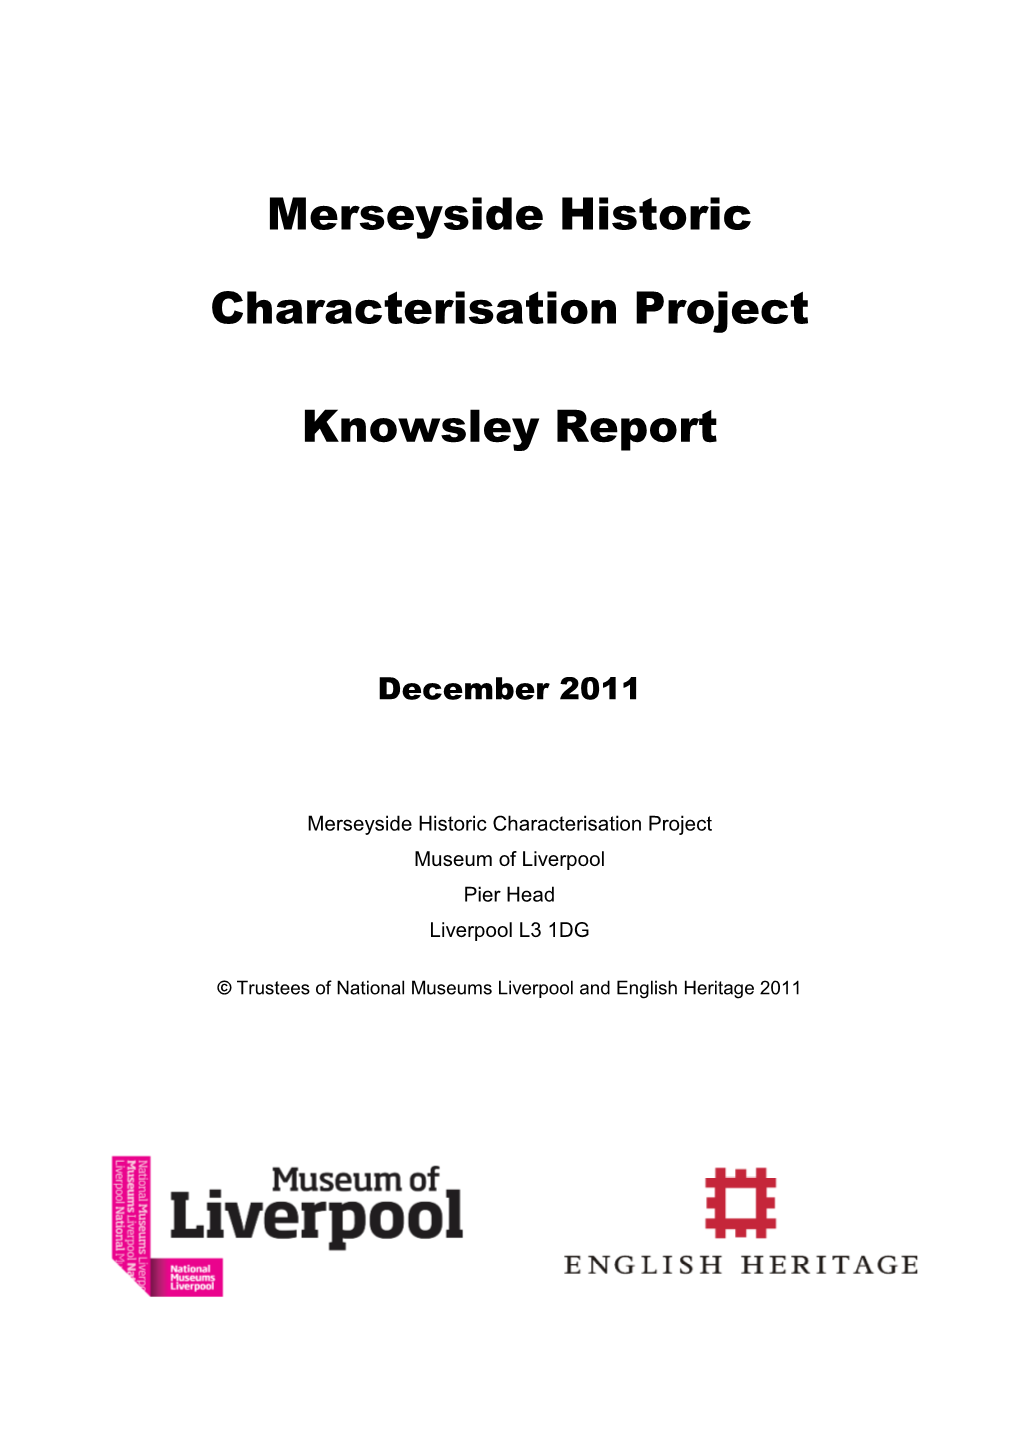 Merseyside Historic Characterisation Project Knowsley Report